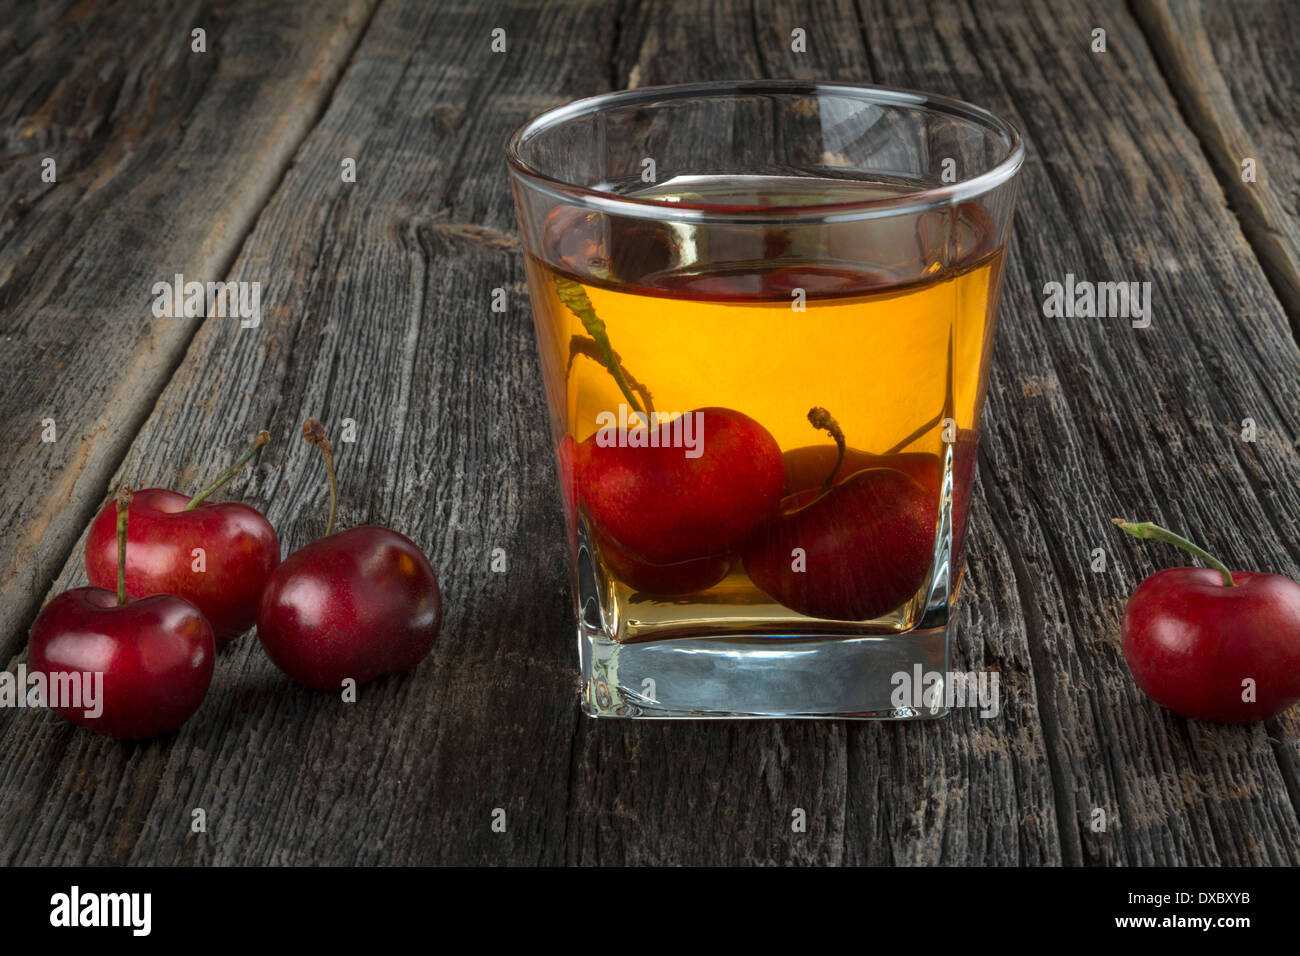 Manhattan or other whiskey cocktail, with cherries submerged and cherries next to it Stock Photo